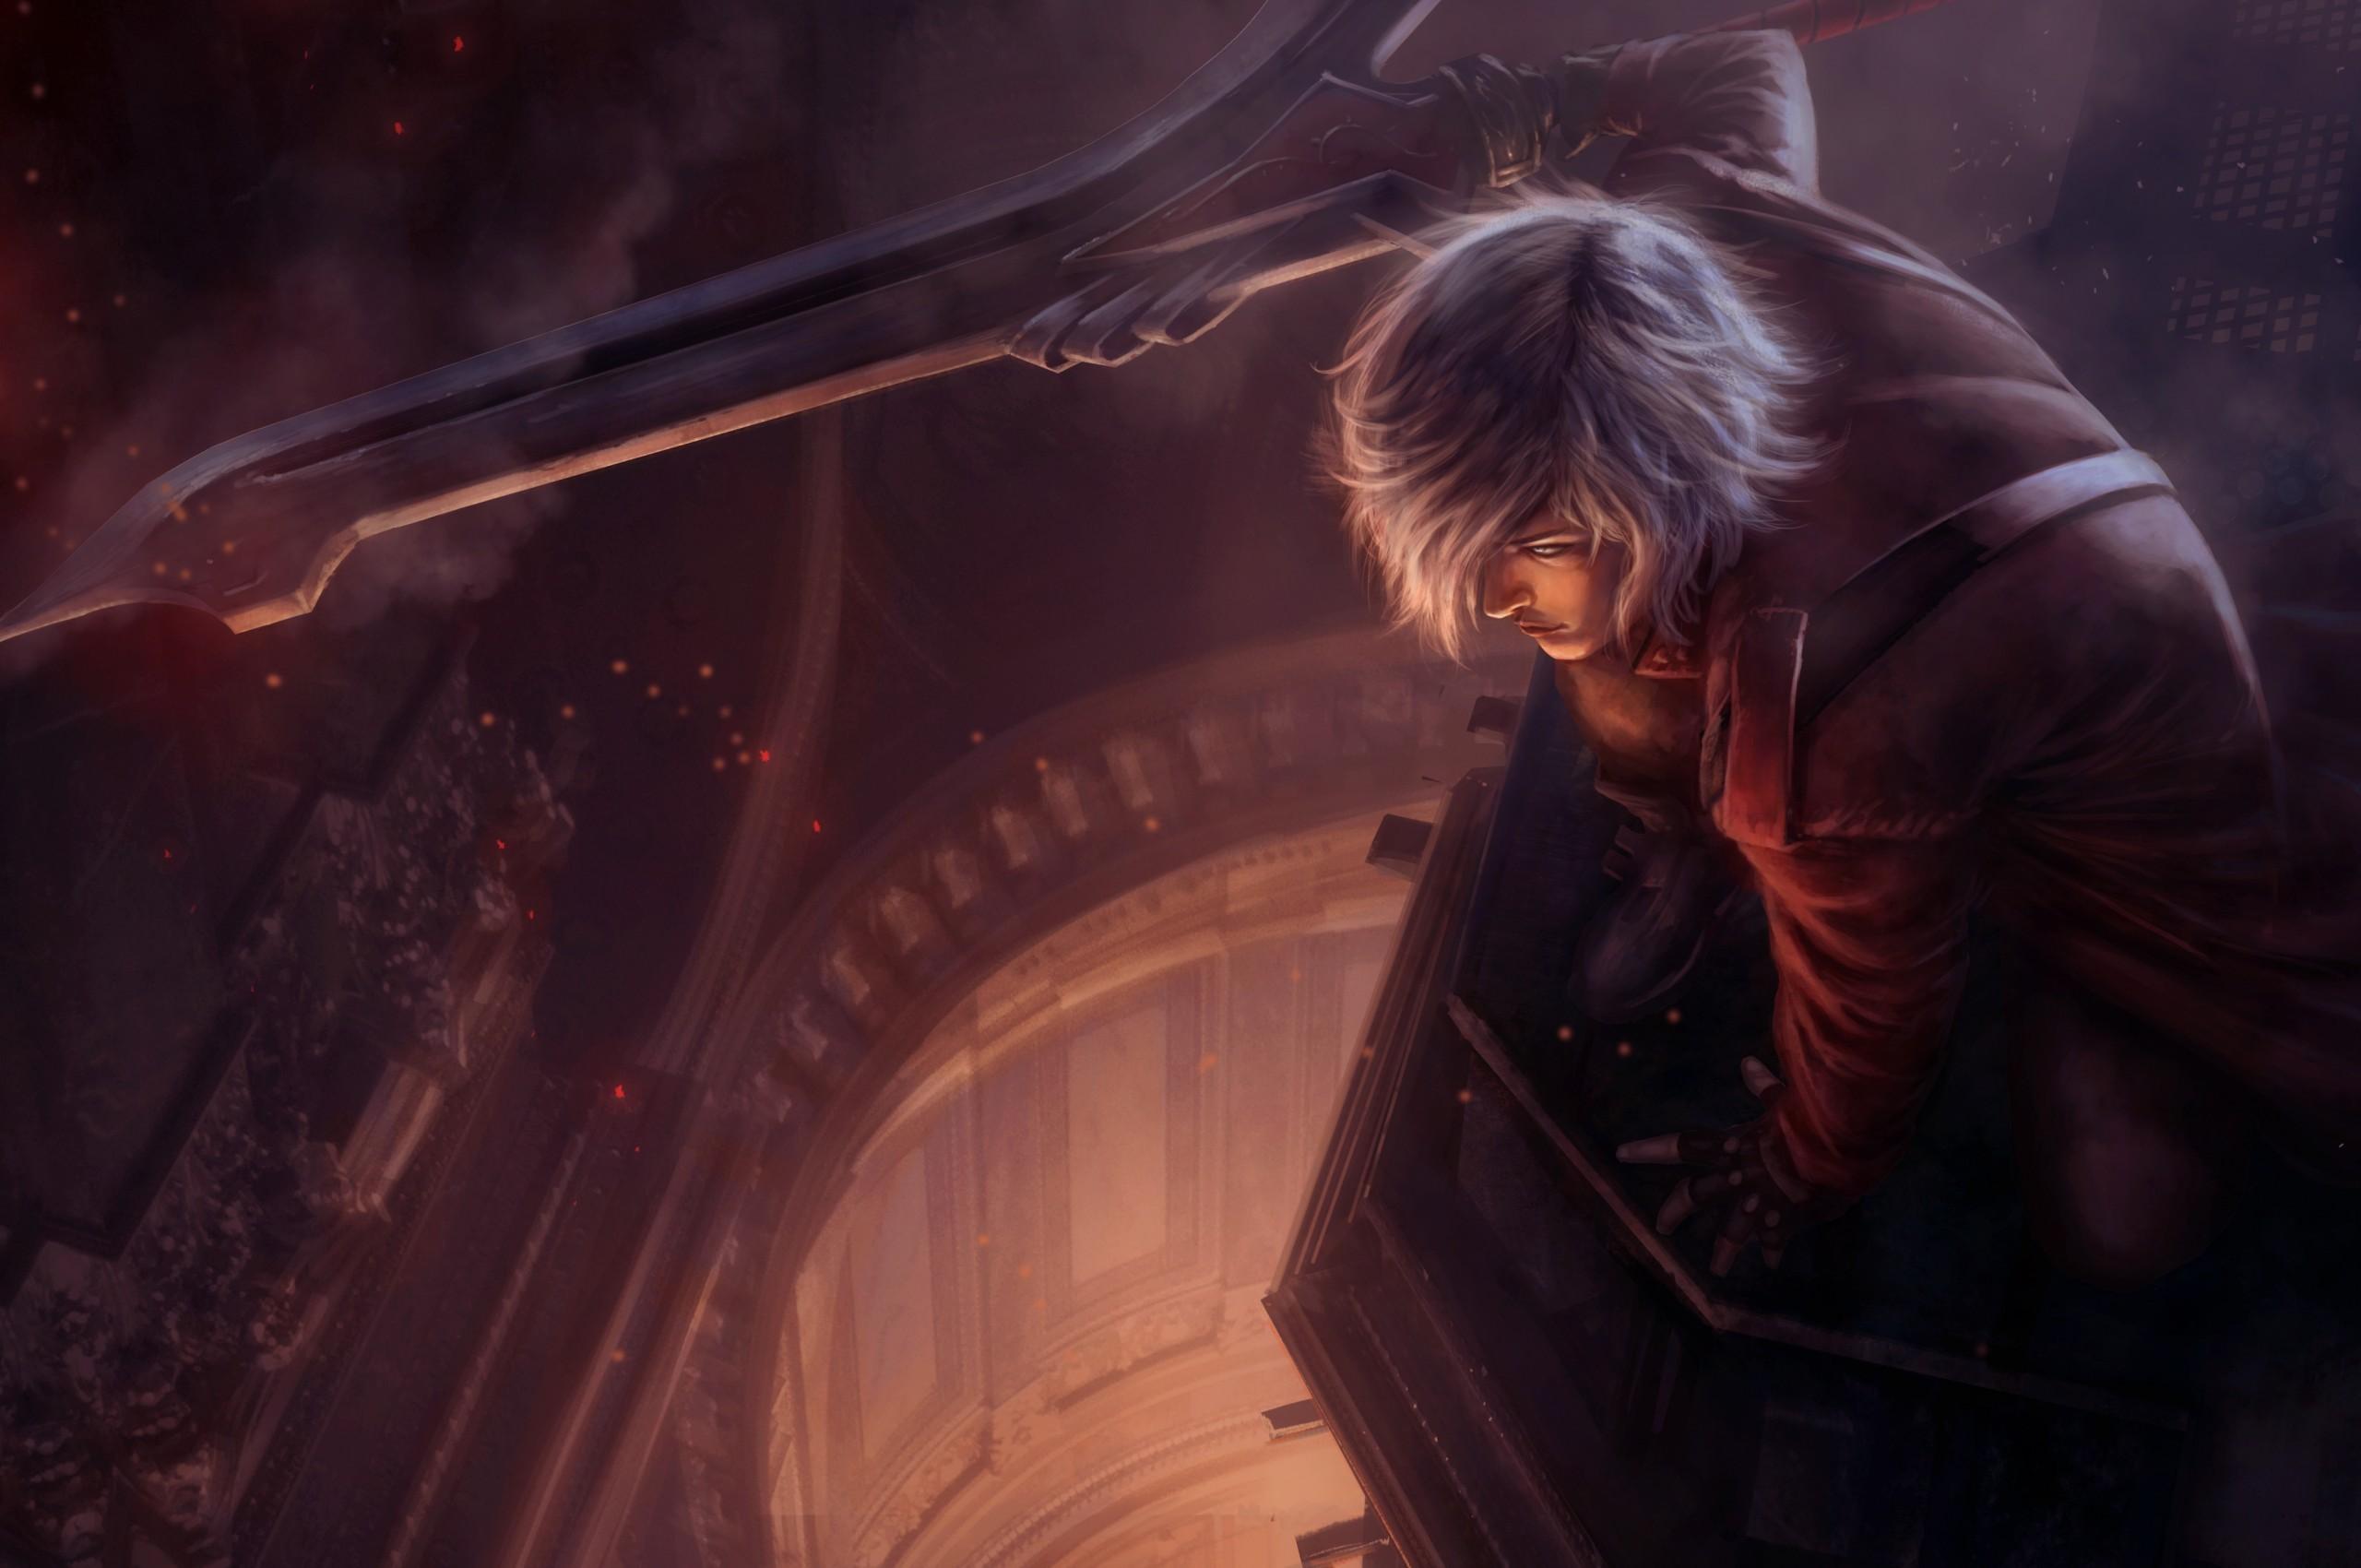 Dante from Devil May Cry 5 Wallpaper 4k HD ID:4319